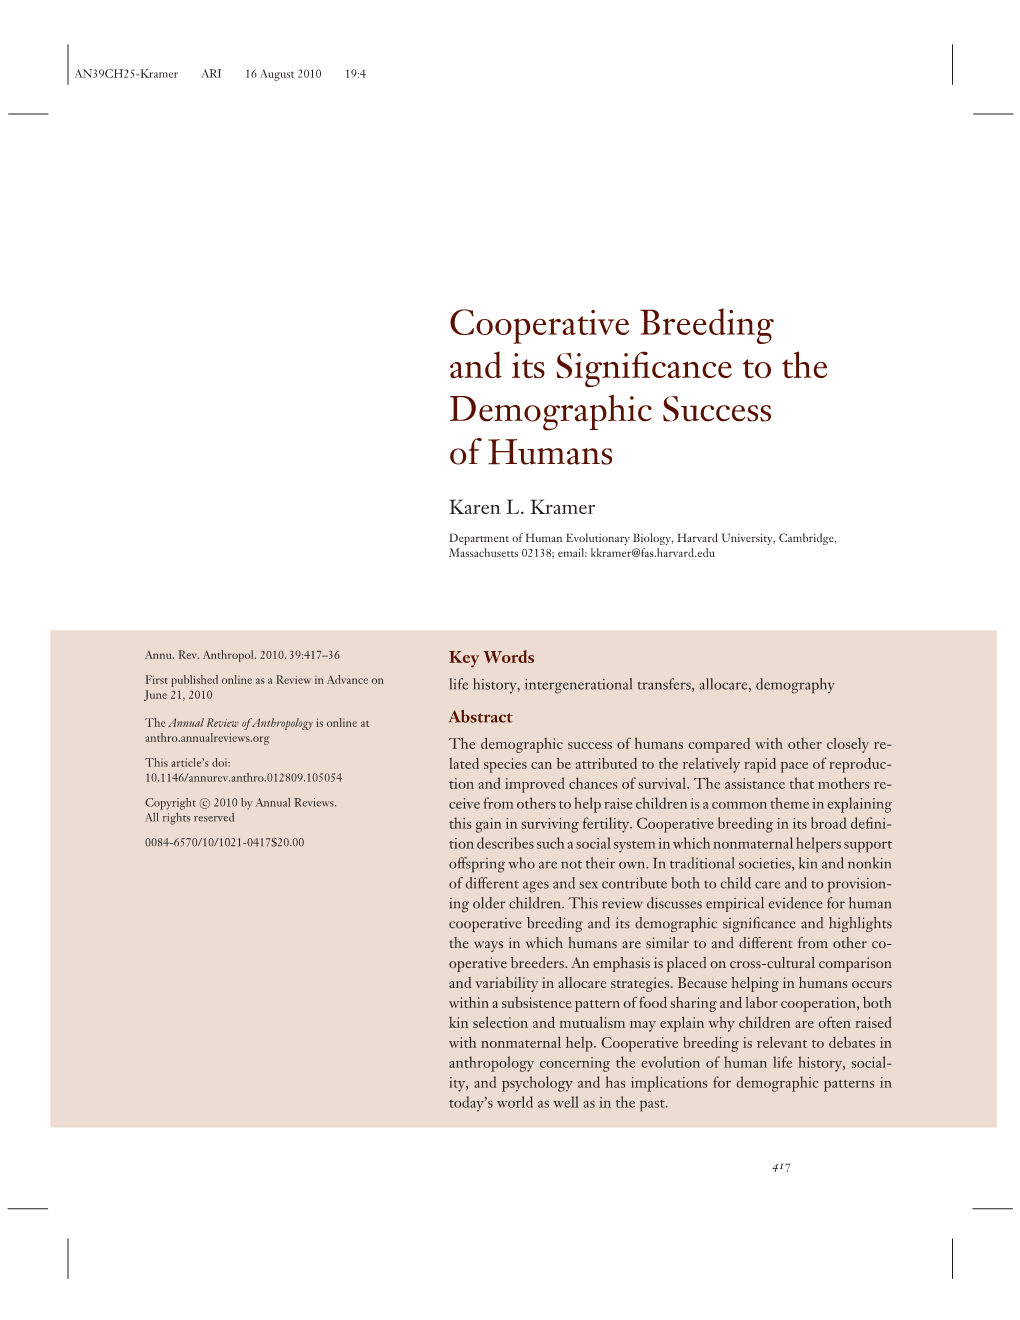 Cooperative Breeding and Its Significance to the Demographic